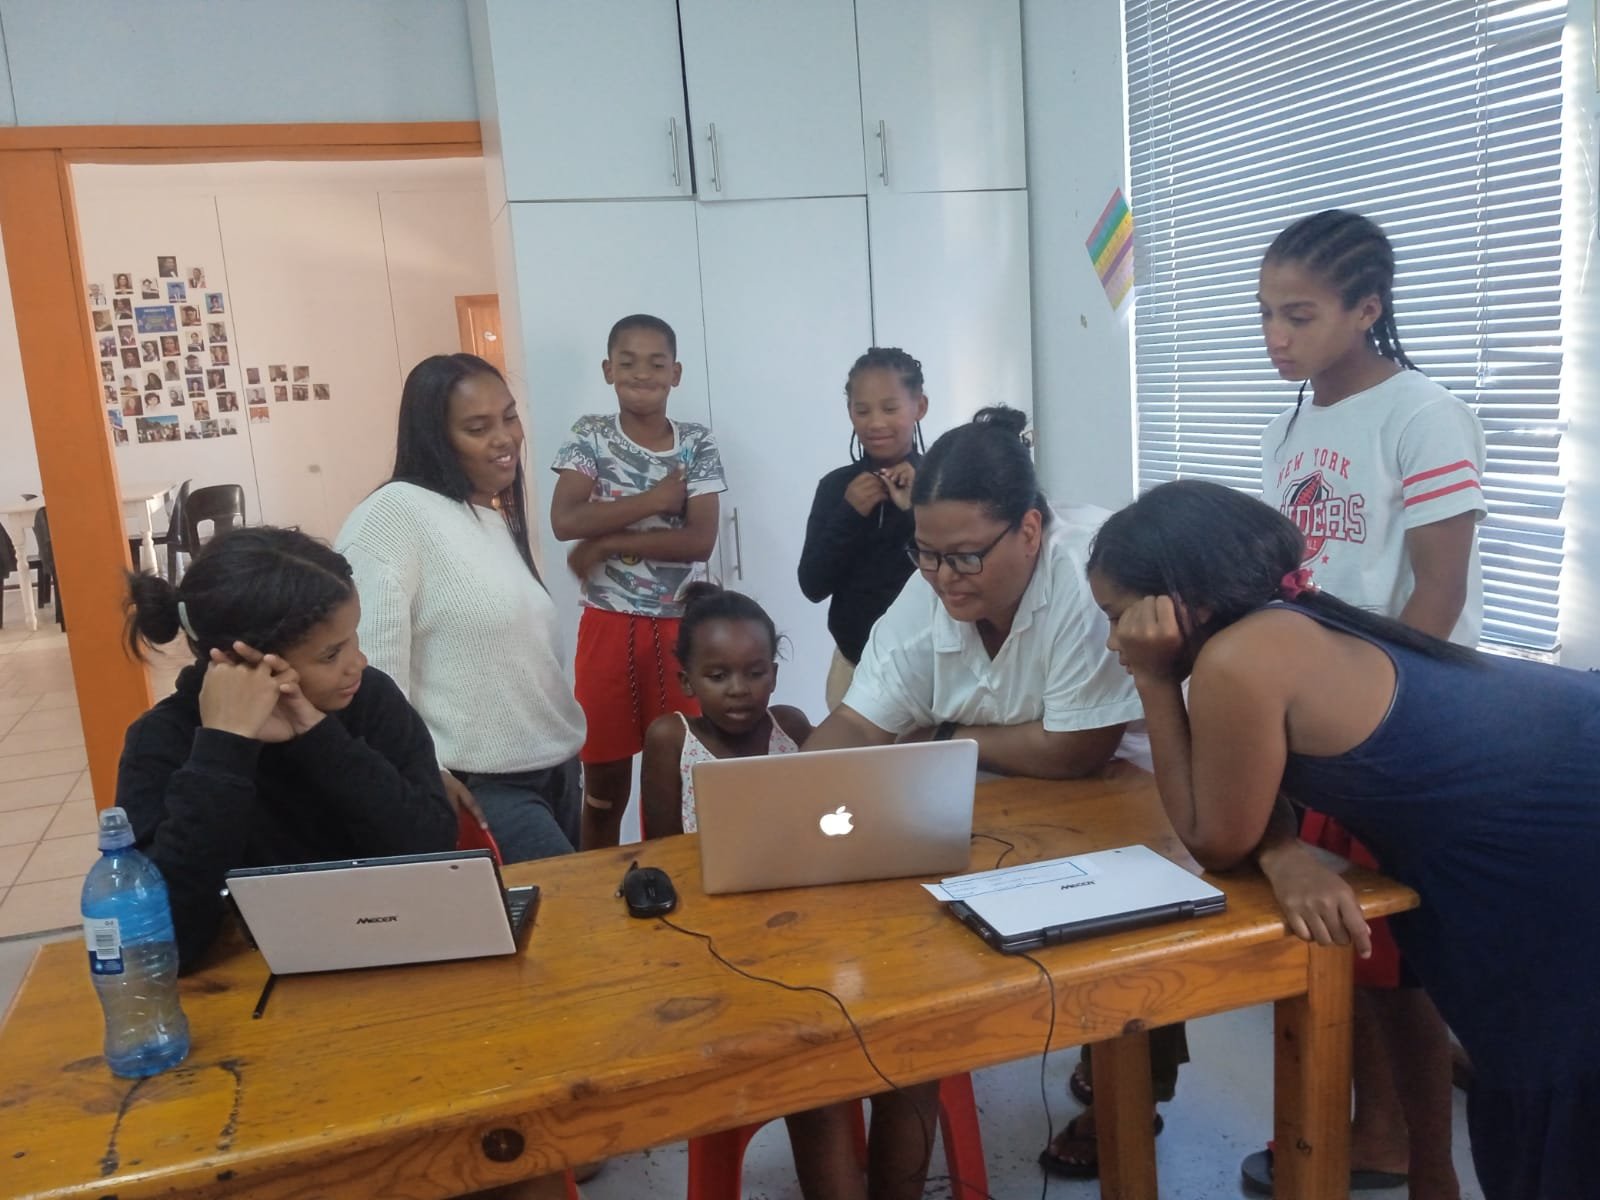 🌟 Update on our &ldquo;Future Workplace Skills&rdquo; Program! 🌟

🚀 Three months into our journey, and we're delighted with the progress! Our young learners are embracing coding, tackling challenges, and developing essential skills for the future 